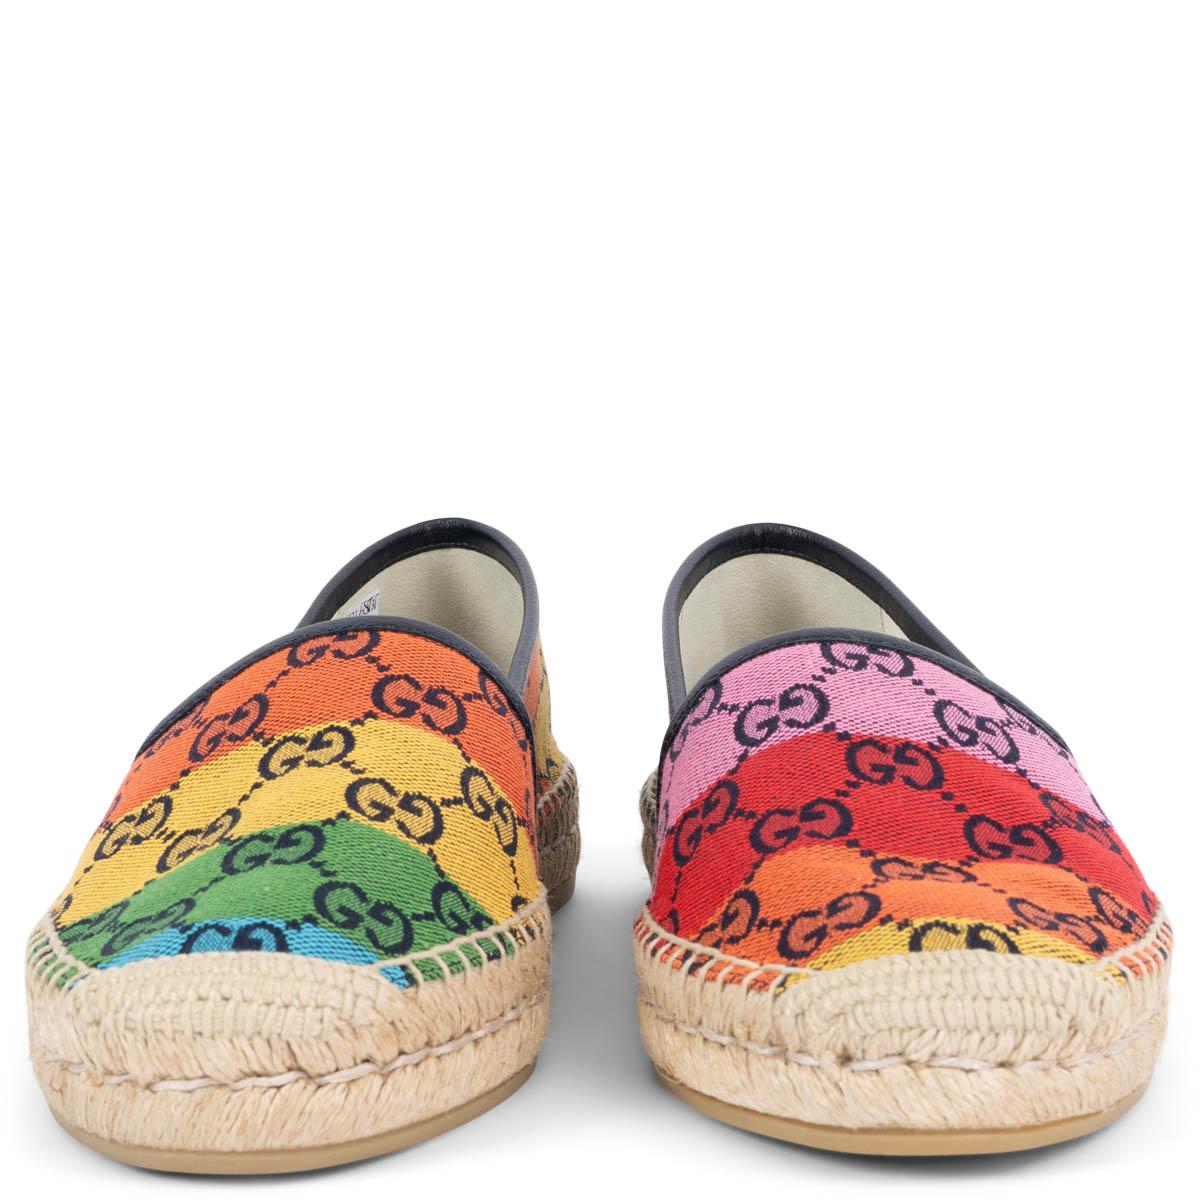 100% authentic Gucci Pilar slip on espadrilles in rainbow colored GG Supreme eco-washed organic jacquard denim. Black leather trim at topline and sides. Braided jute detail at sole edge with rubber sole.  Brand new. Come with dust bag.